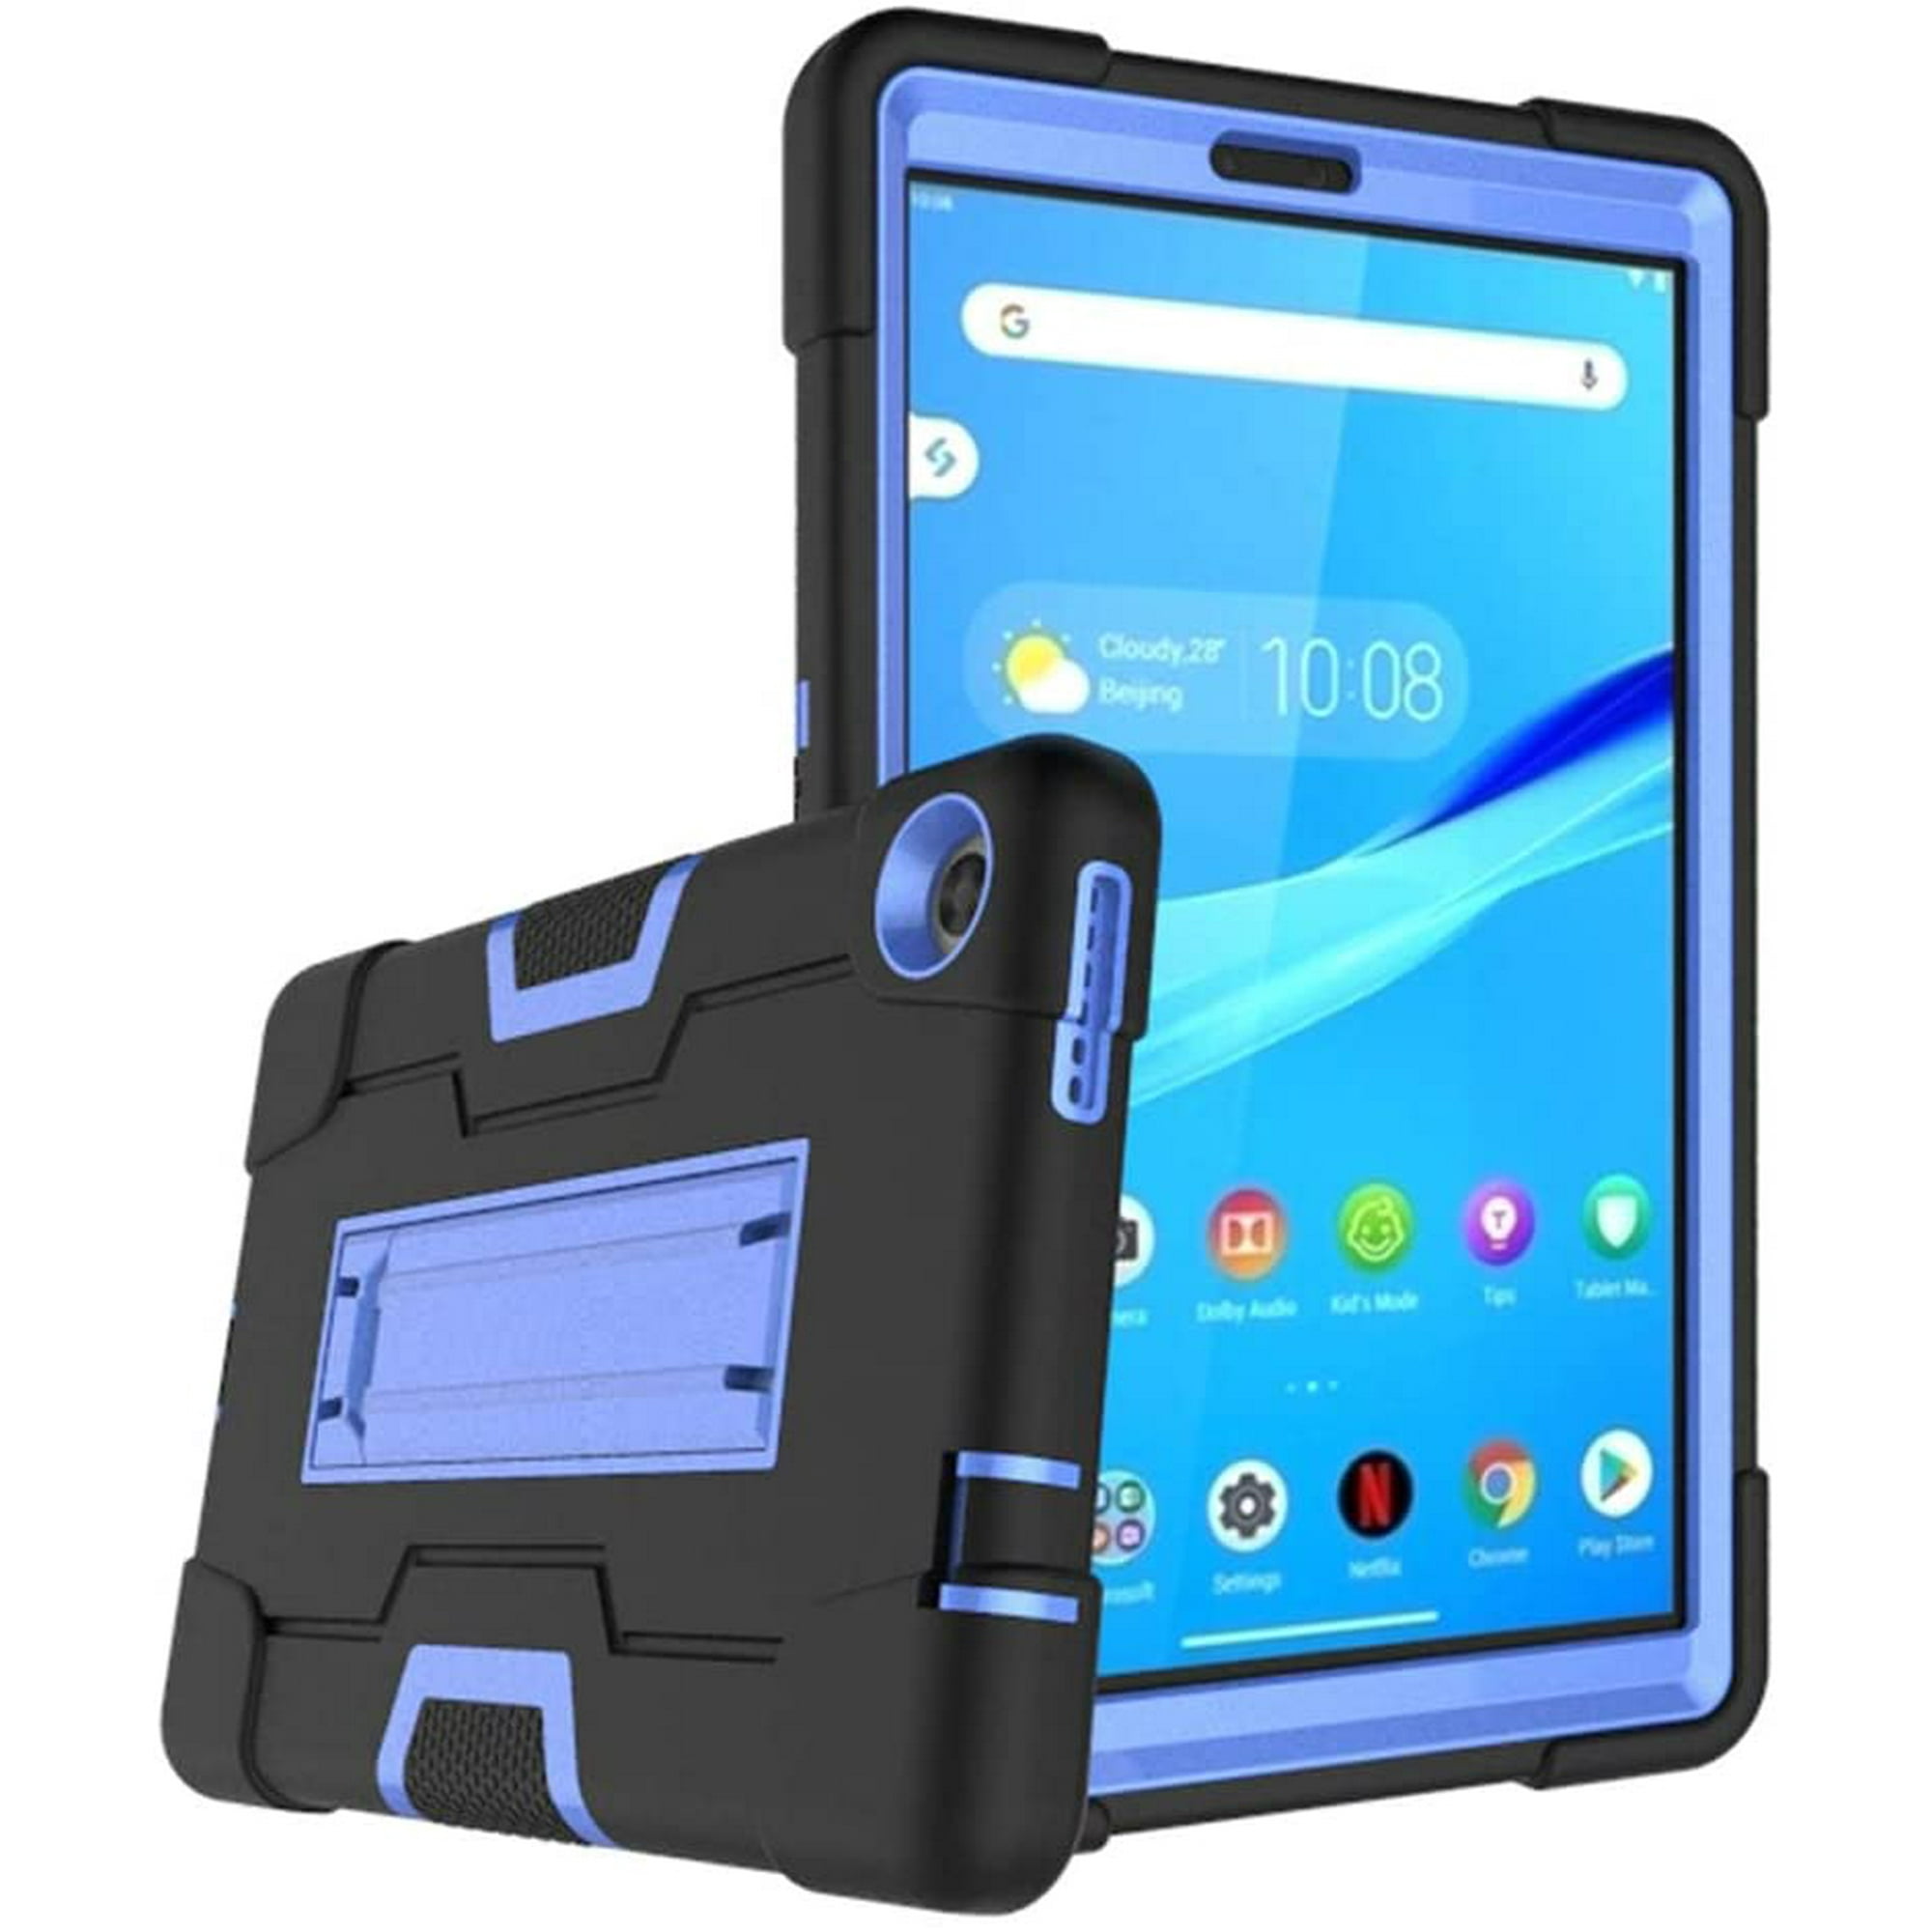 Mignova for Lenovo Tab M8  Inch Case,Hybrid Three Layer Full-Body  Shockproof Armor Defender Full-Body Rugged Protective Case Cover with Stand  for Lenovo Tab M8/M8 Smart Tab  Tablet (Black/Blue) | Walmart